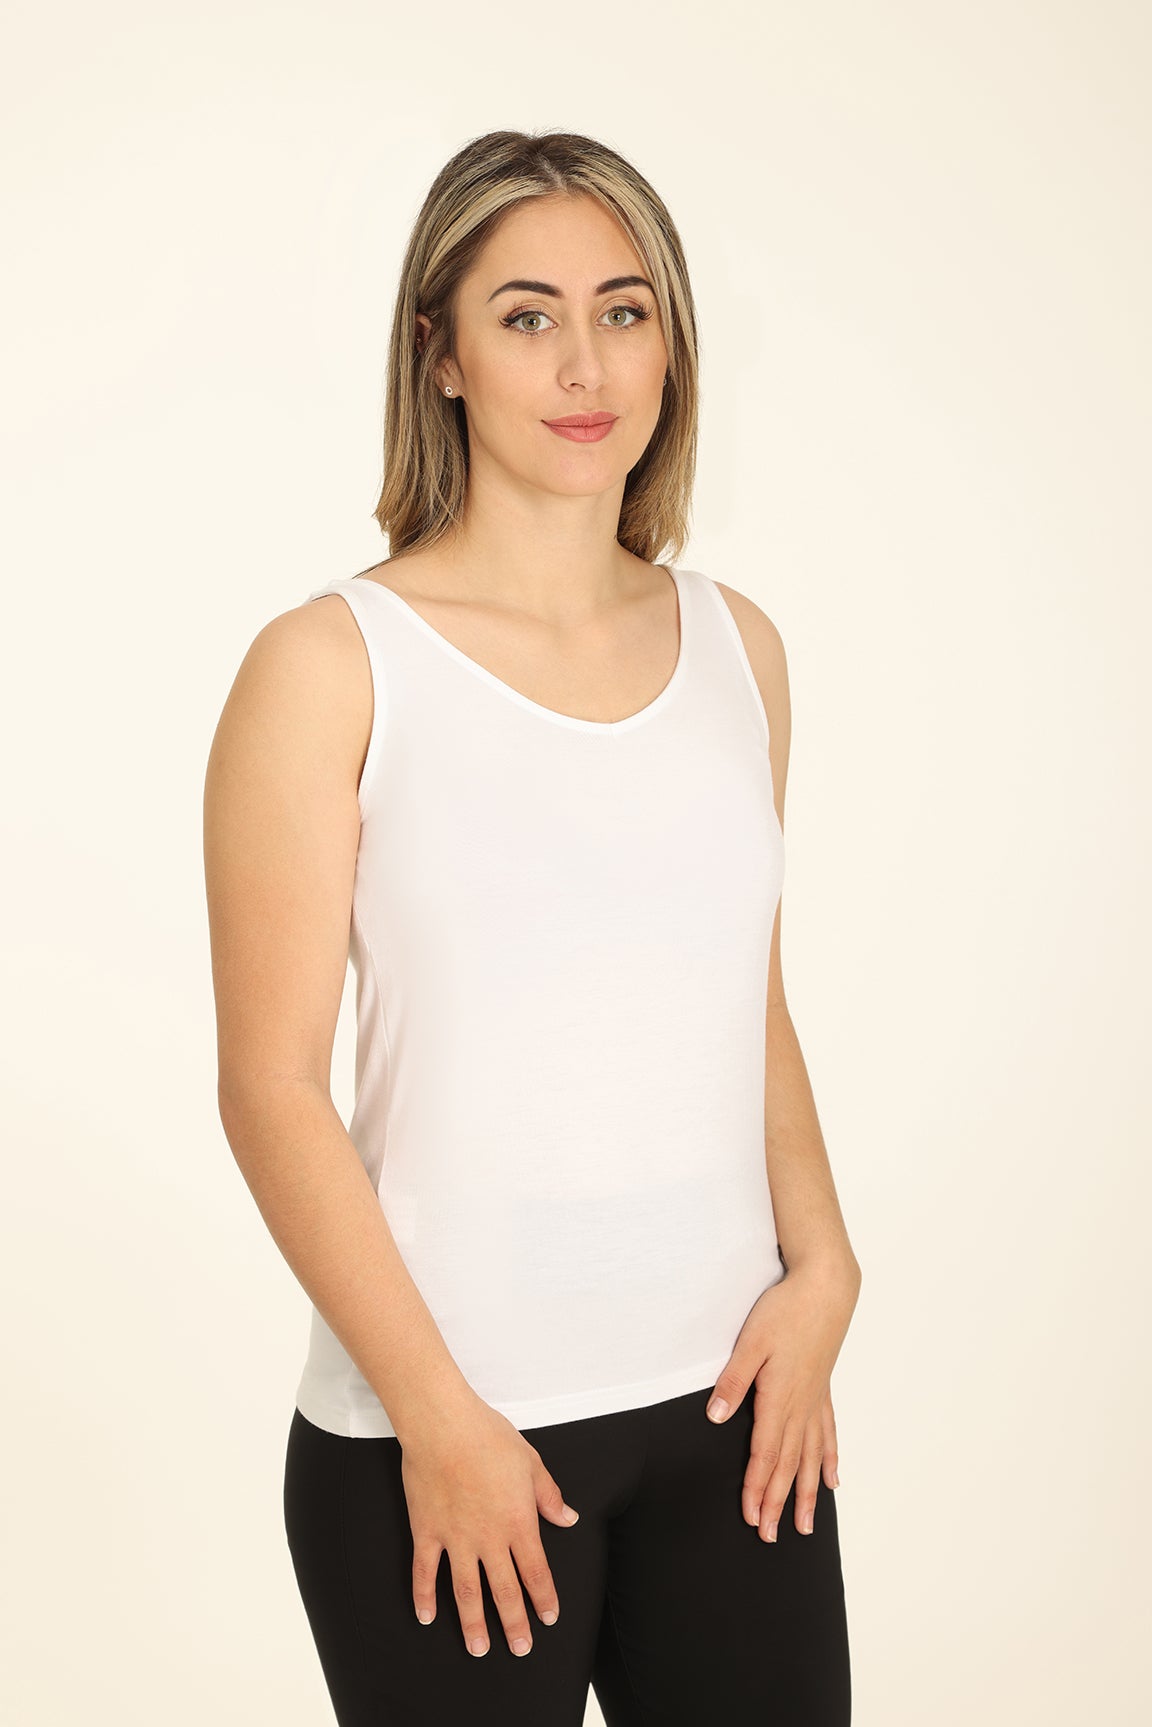 Women's Two Way Basic Cami in White